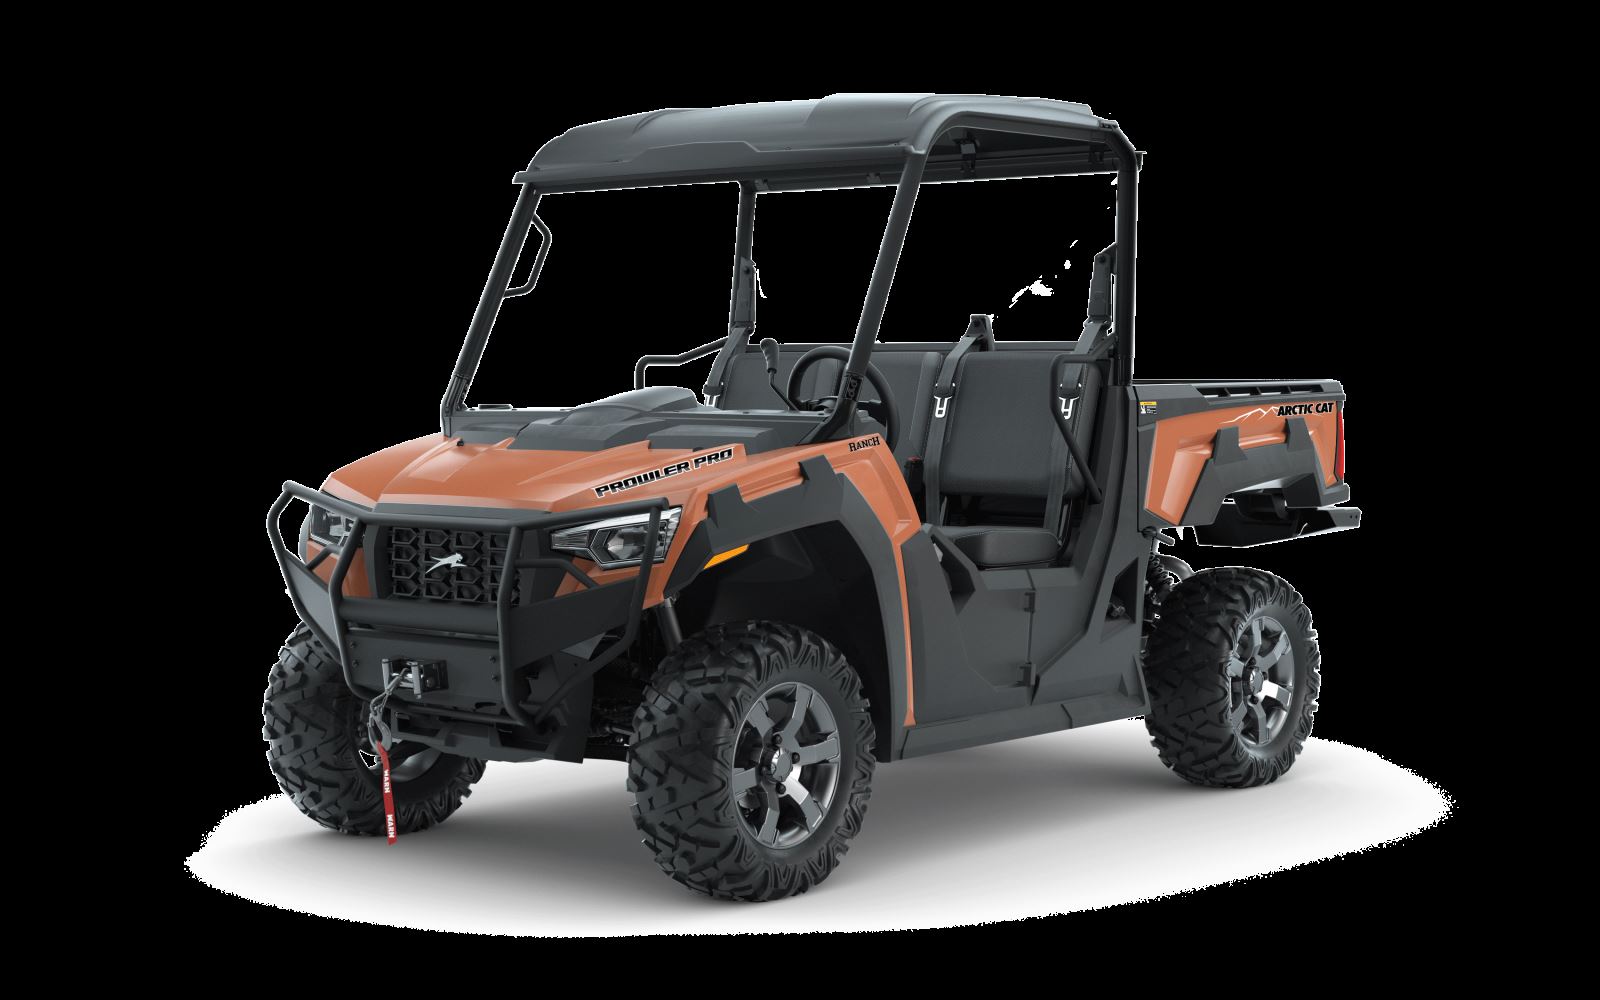 Arctic Cat Releases 2021 Offroad Lineup New models for some exciting